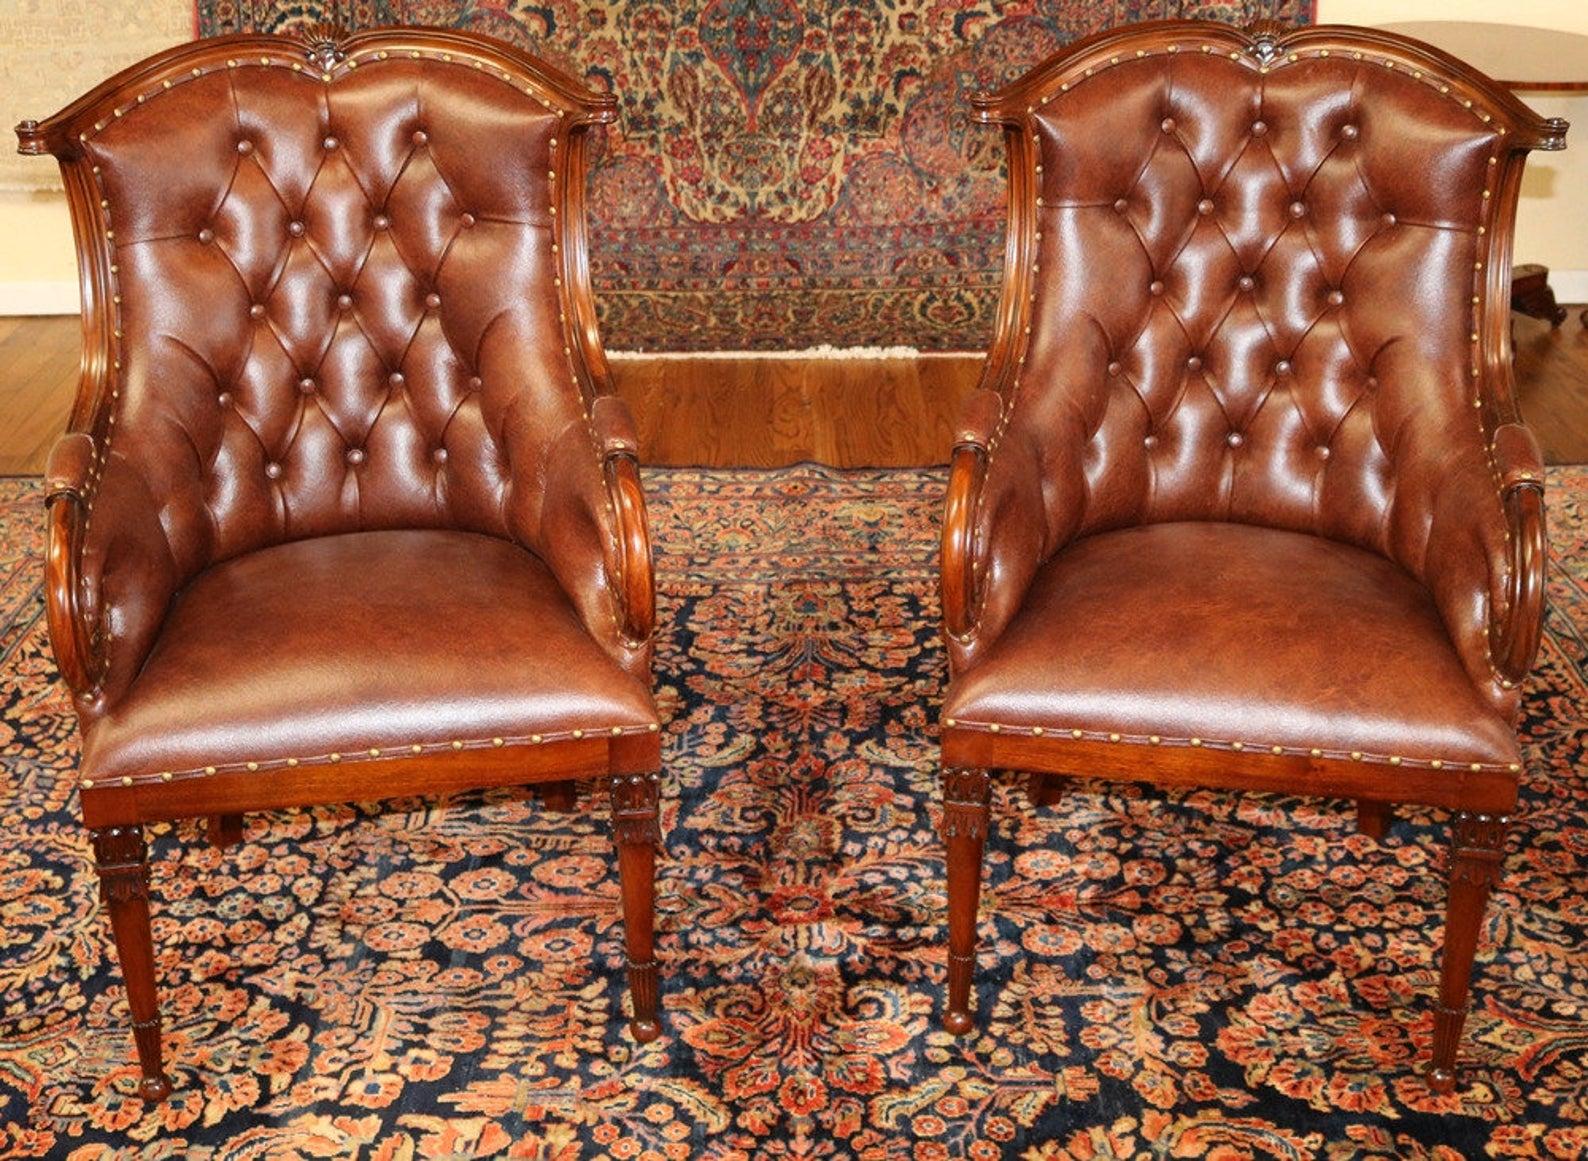 Stunning Pair of Brown Real Top Grain Leather Tufted Library Fireside Chairs

Dimensions : 27